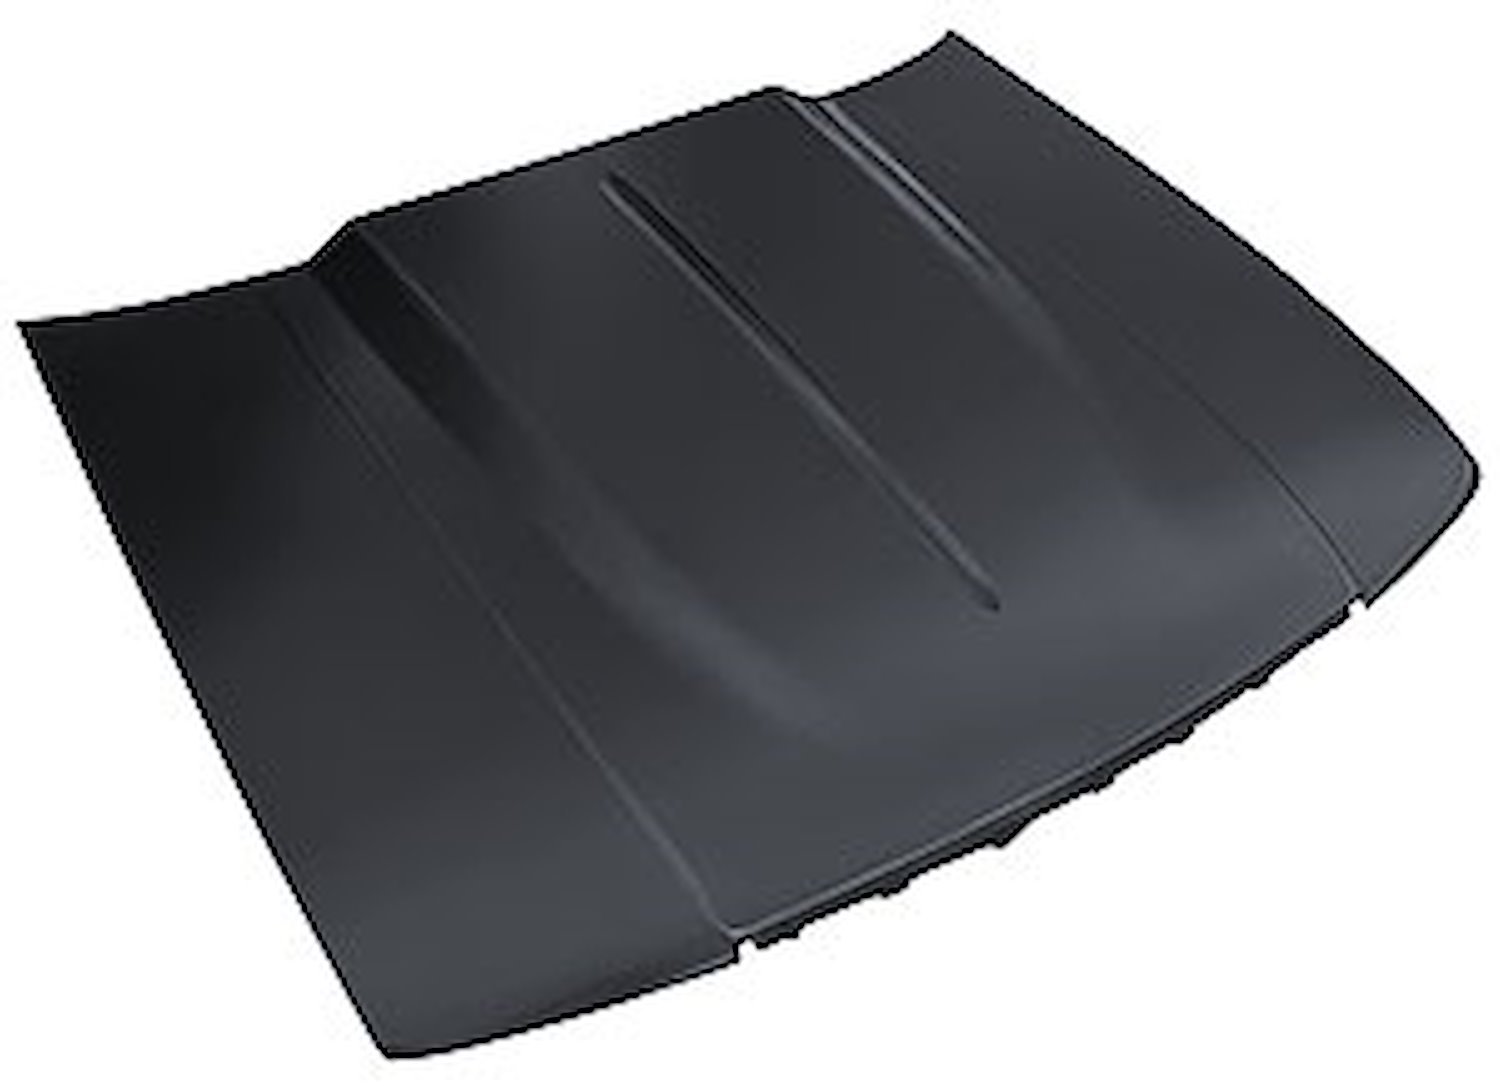 0829-035 Steel Cowl Induction Hood for 1994-1996 Chevy Impala SS, 1991-1996 Chevy Caprice, 1991-1996 Buick Roadmaster [2 in.]